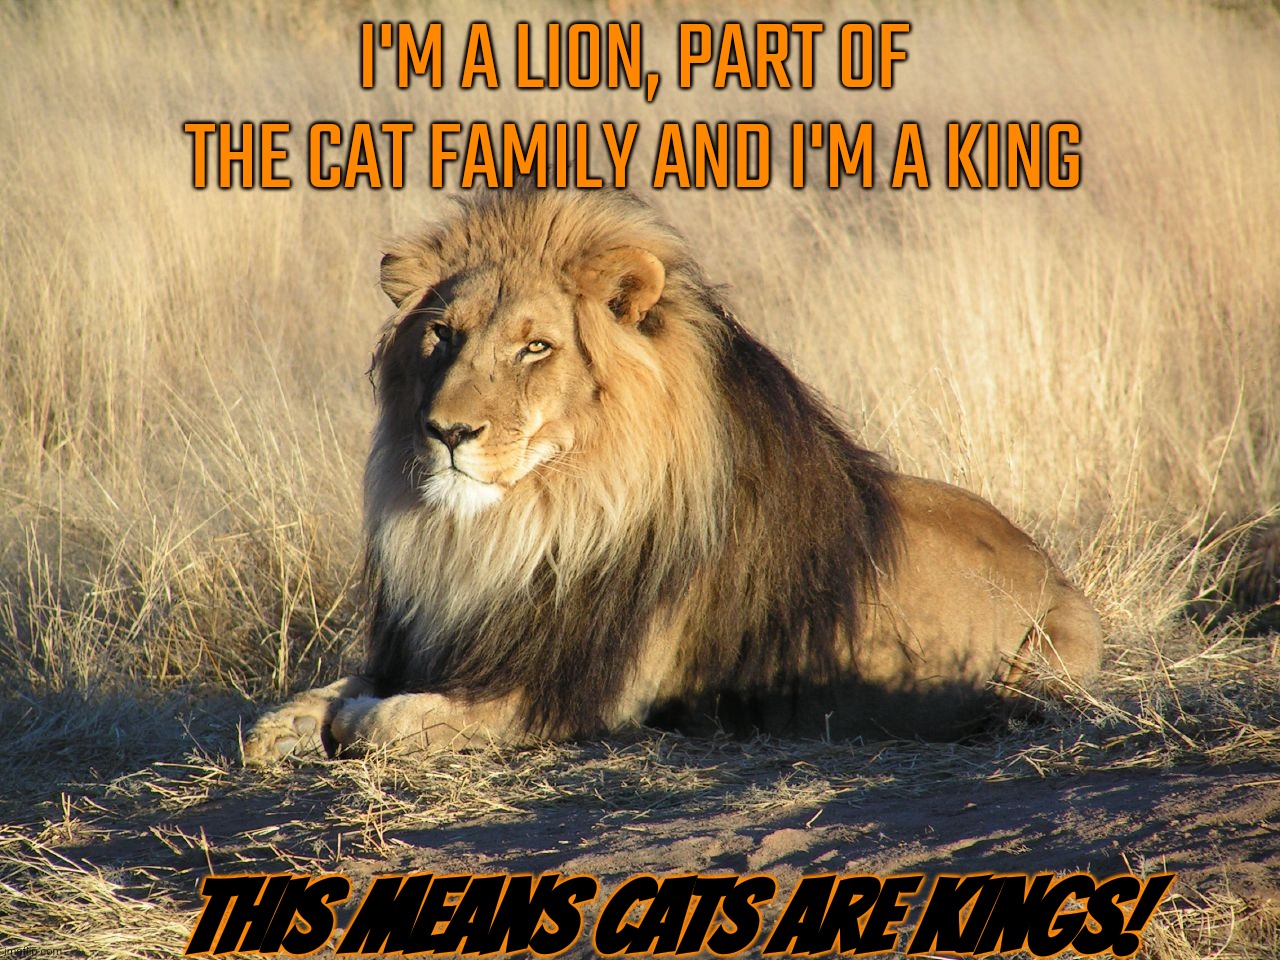 I'M A LION, PART OF THE CAT FAMILY AND I'M A KING; THIS MEANS CATS ARE KINGS! | image tagged in lion,cat | made w/ Imgflip meme maker